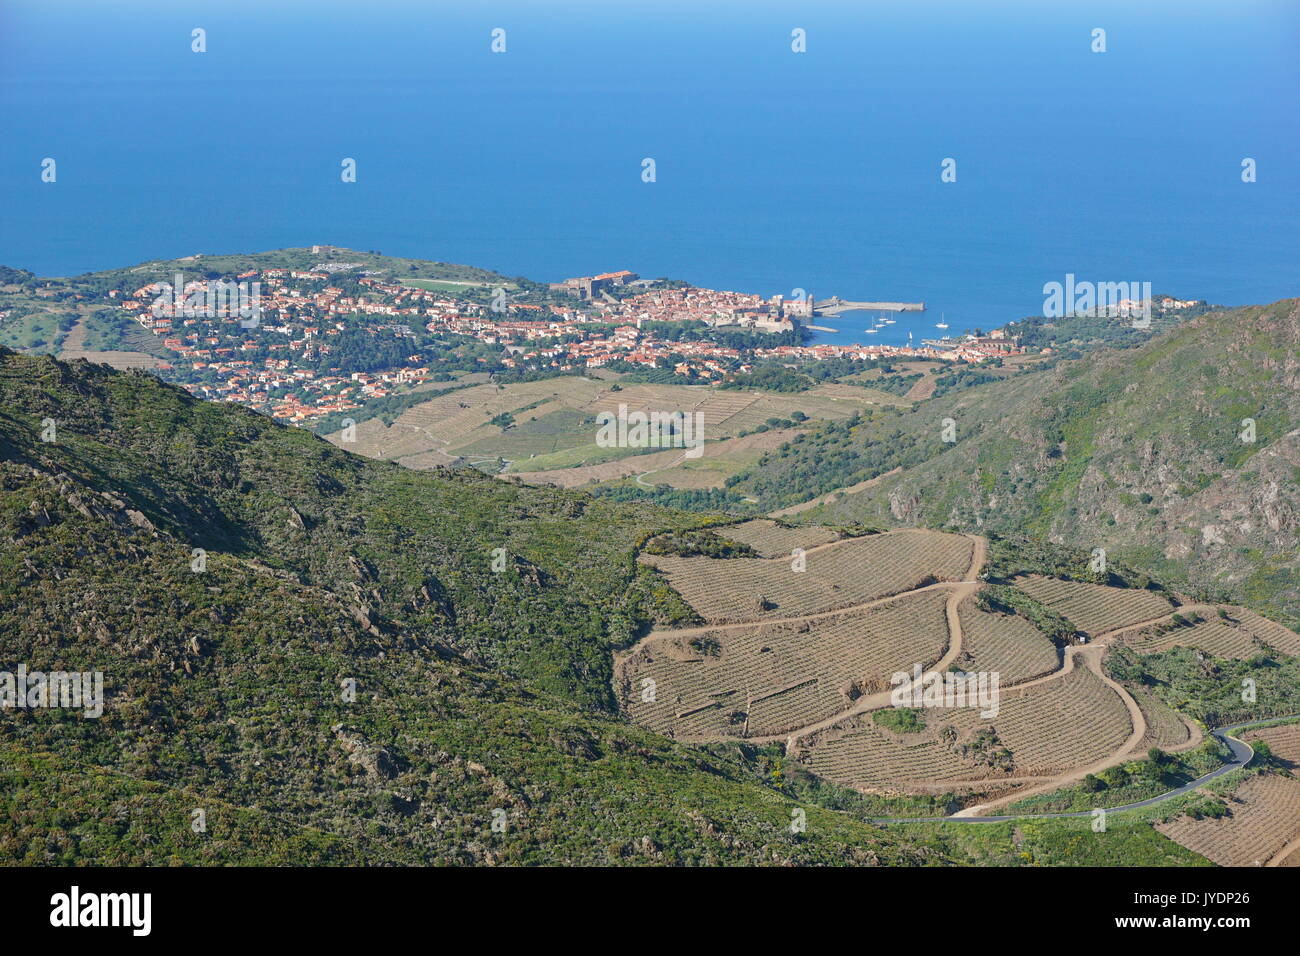 Collioure Mediterranean village landscape seen from the heights, Vermilion coast, south of France, Roussillon, Pyrenees-Orientales Stock Photo